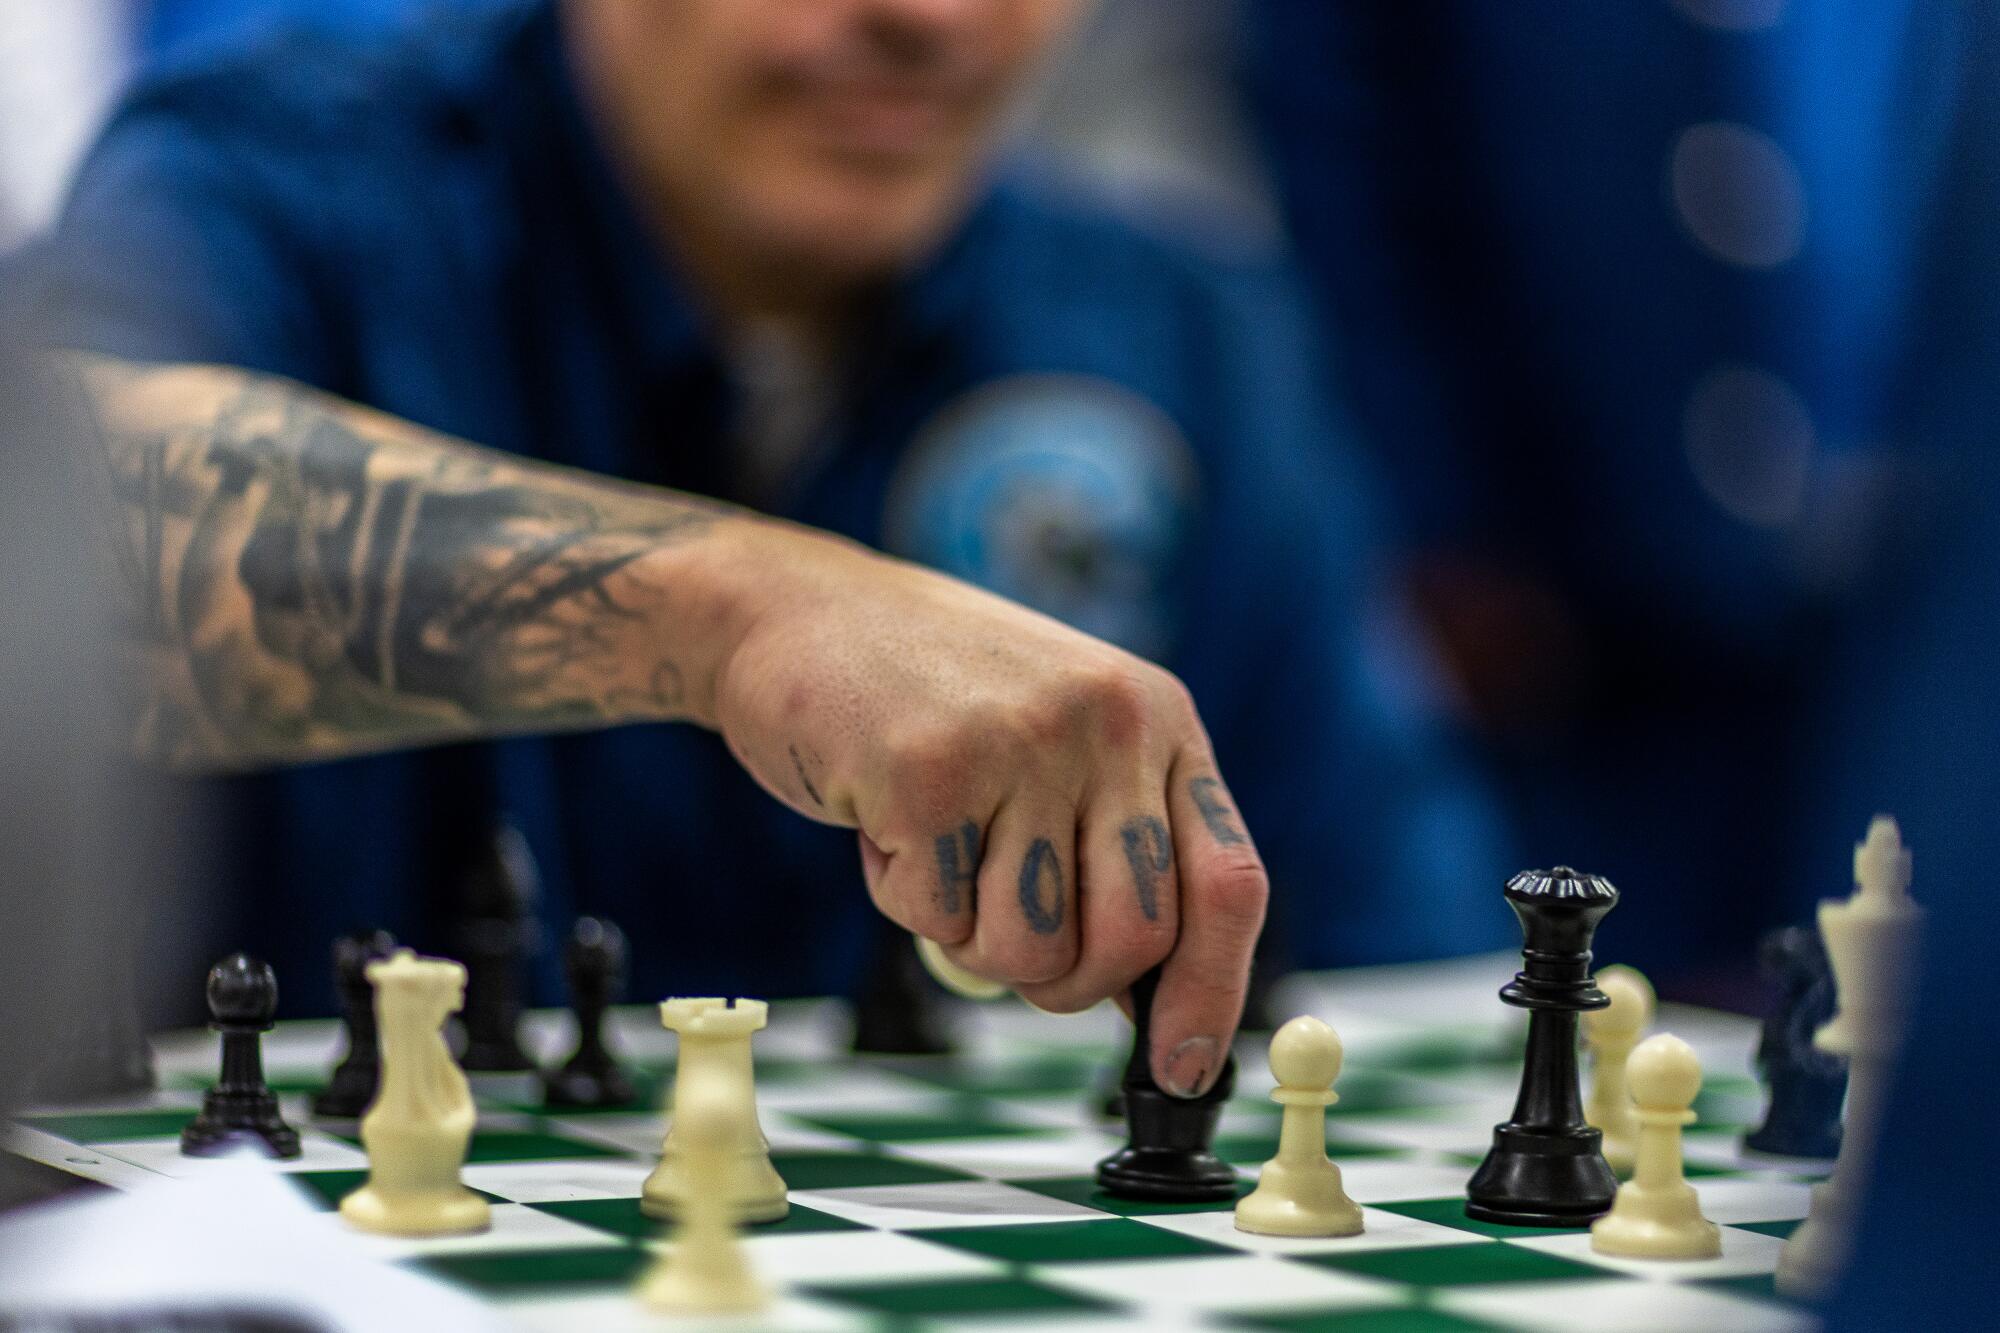 A tattooed man moves a chess piece.